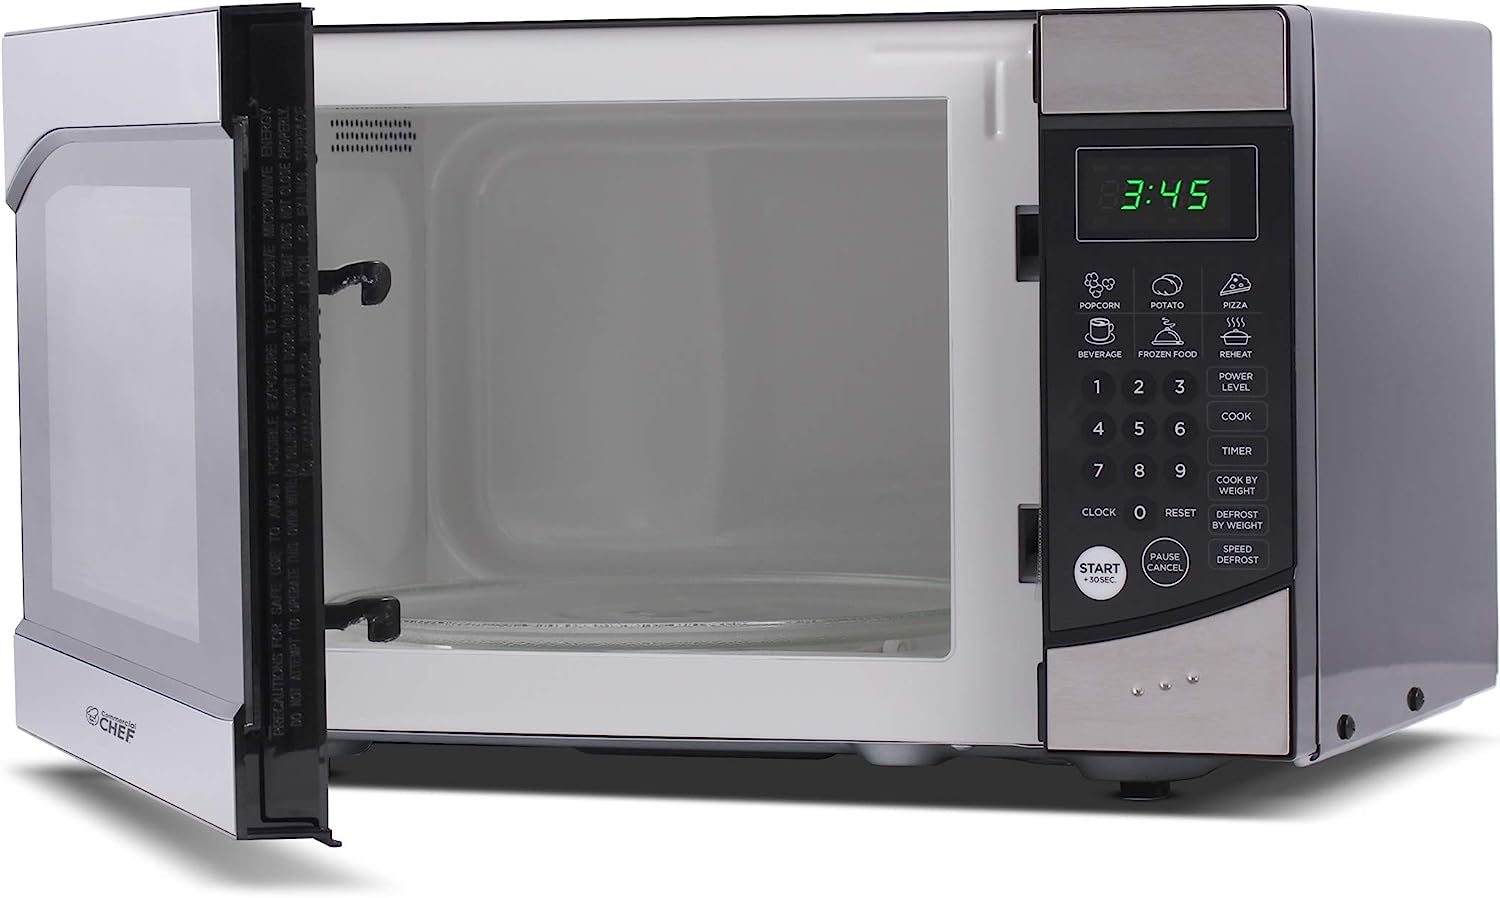 BLACK+DECKER 0.9 cu ft 900W Microwave Oven, Stainless Steel Brand New 